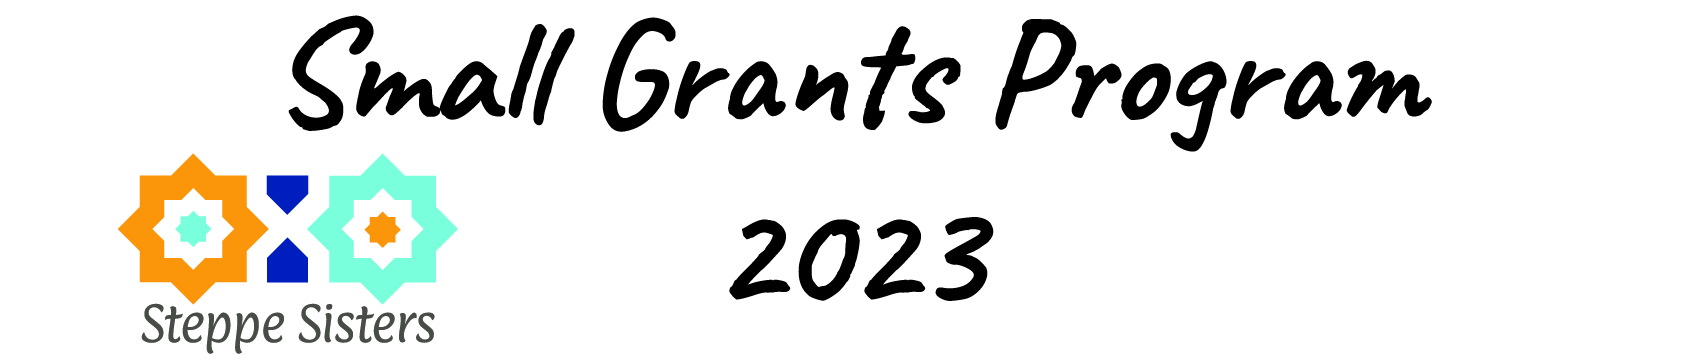 UPDATE! Steppe Sisters Small Grants Program 2023